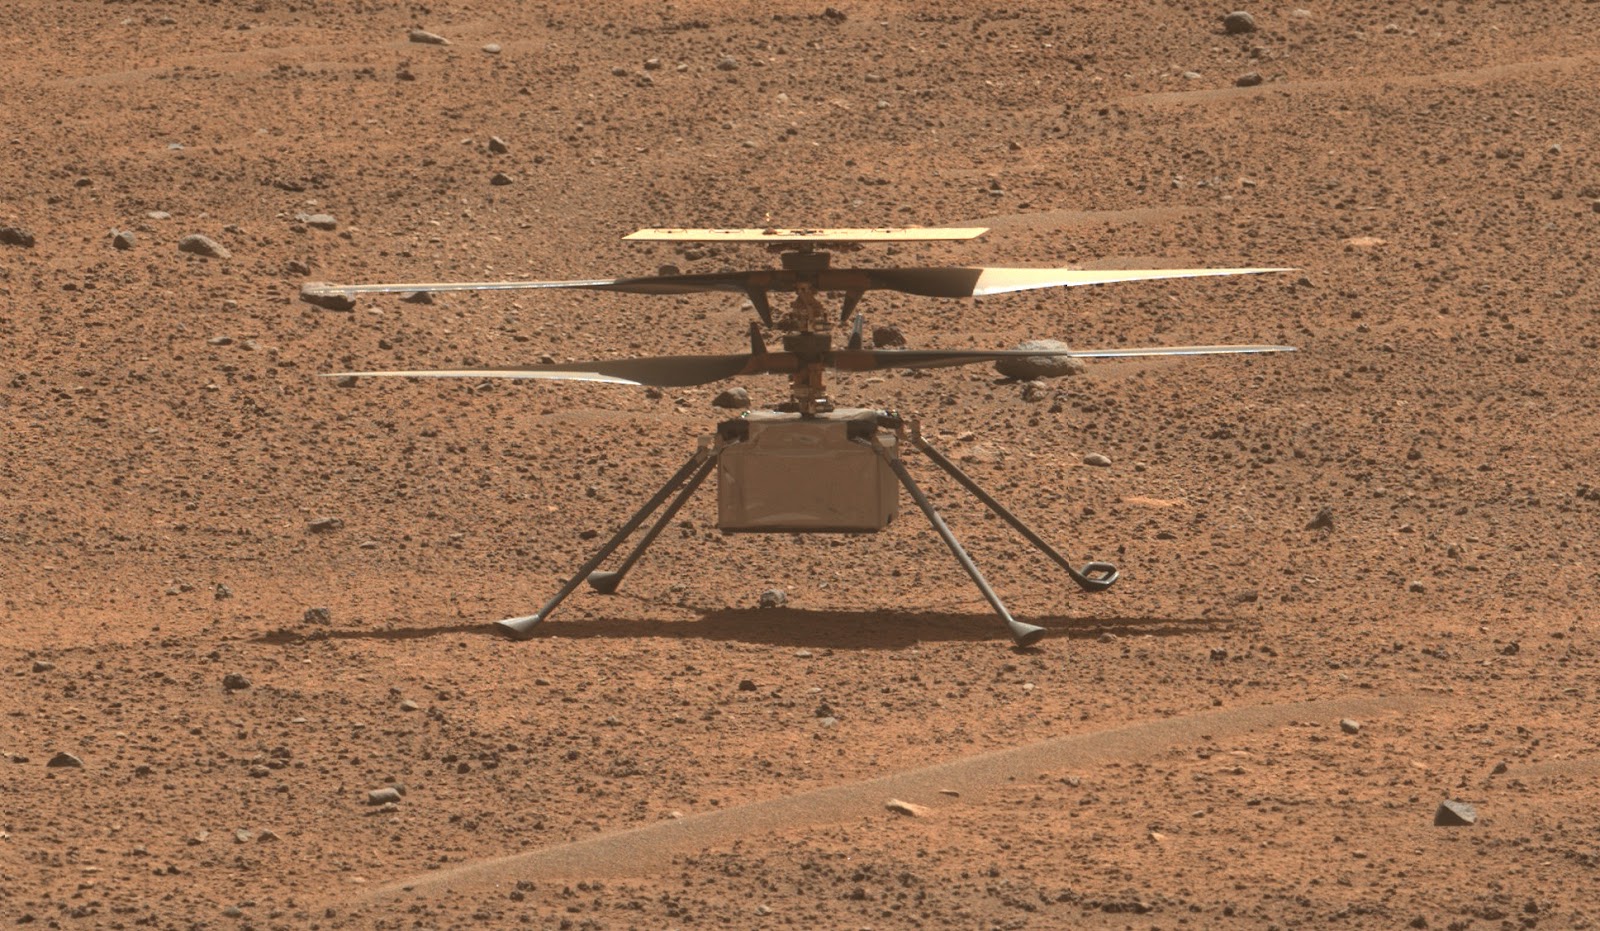 NASA's Mars helicopter on the Red Planet